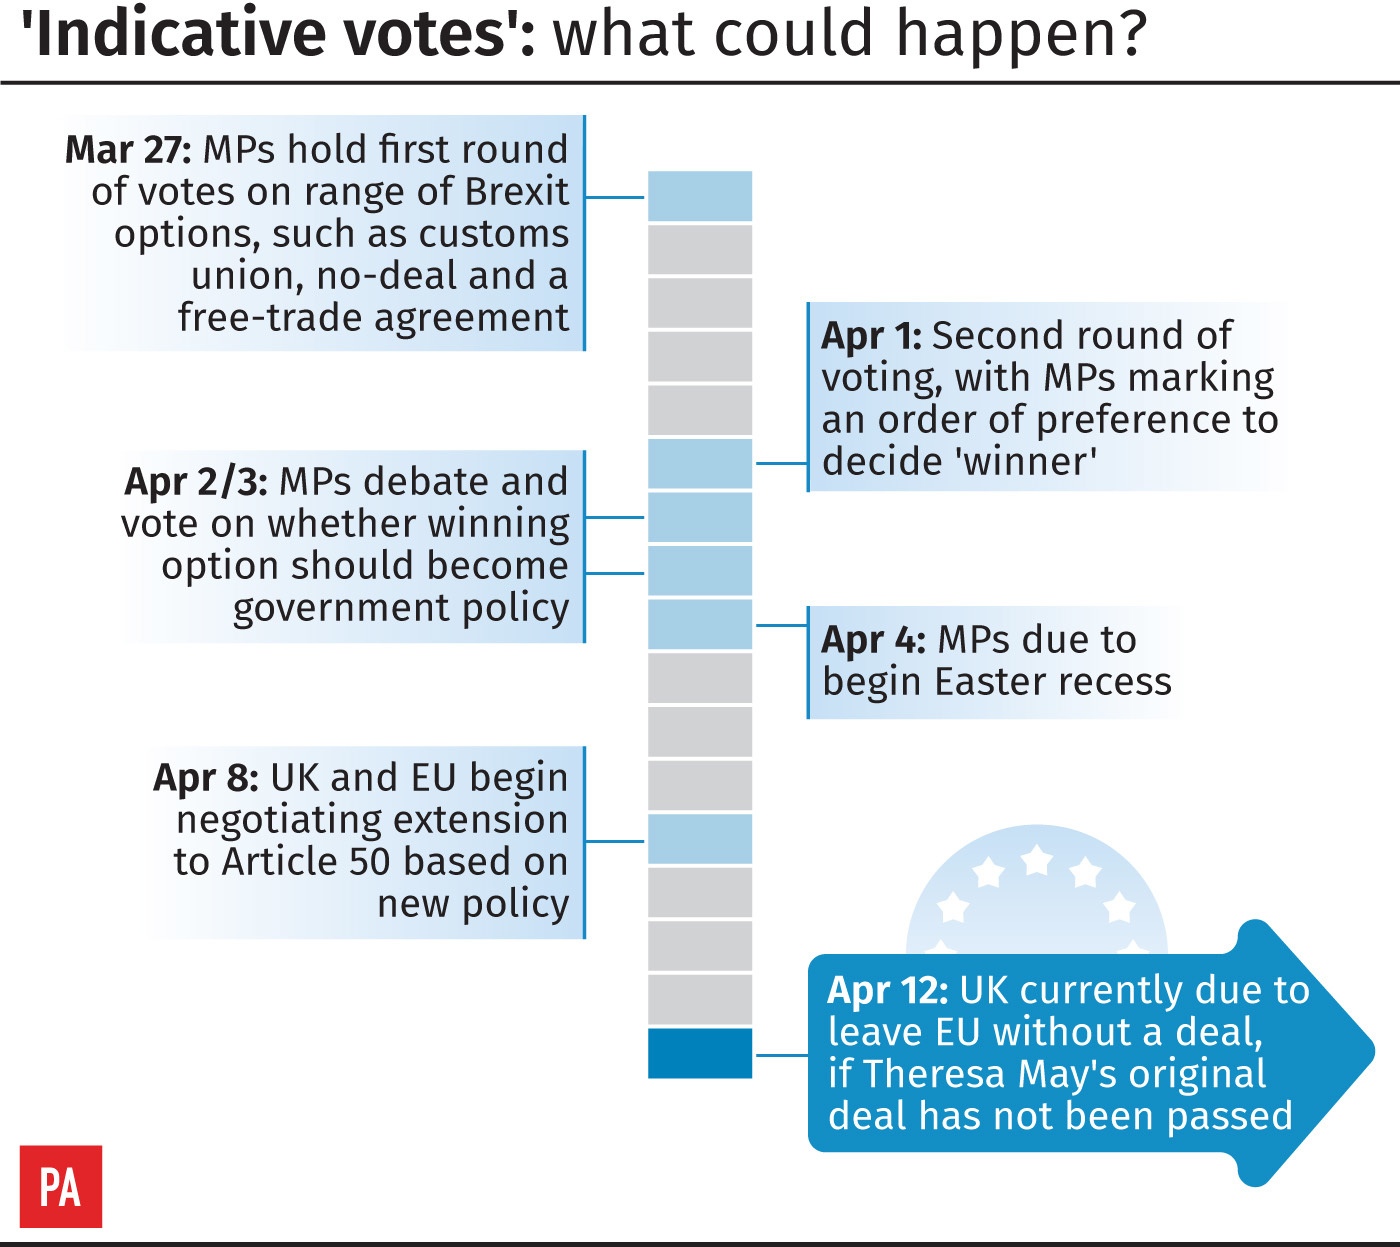 'Indicative votes': what could happen?